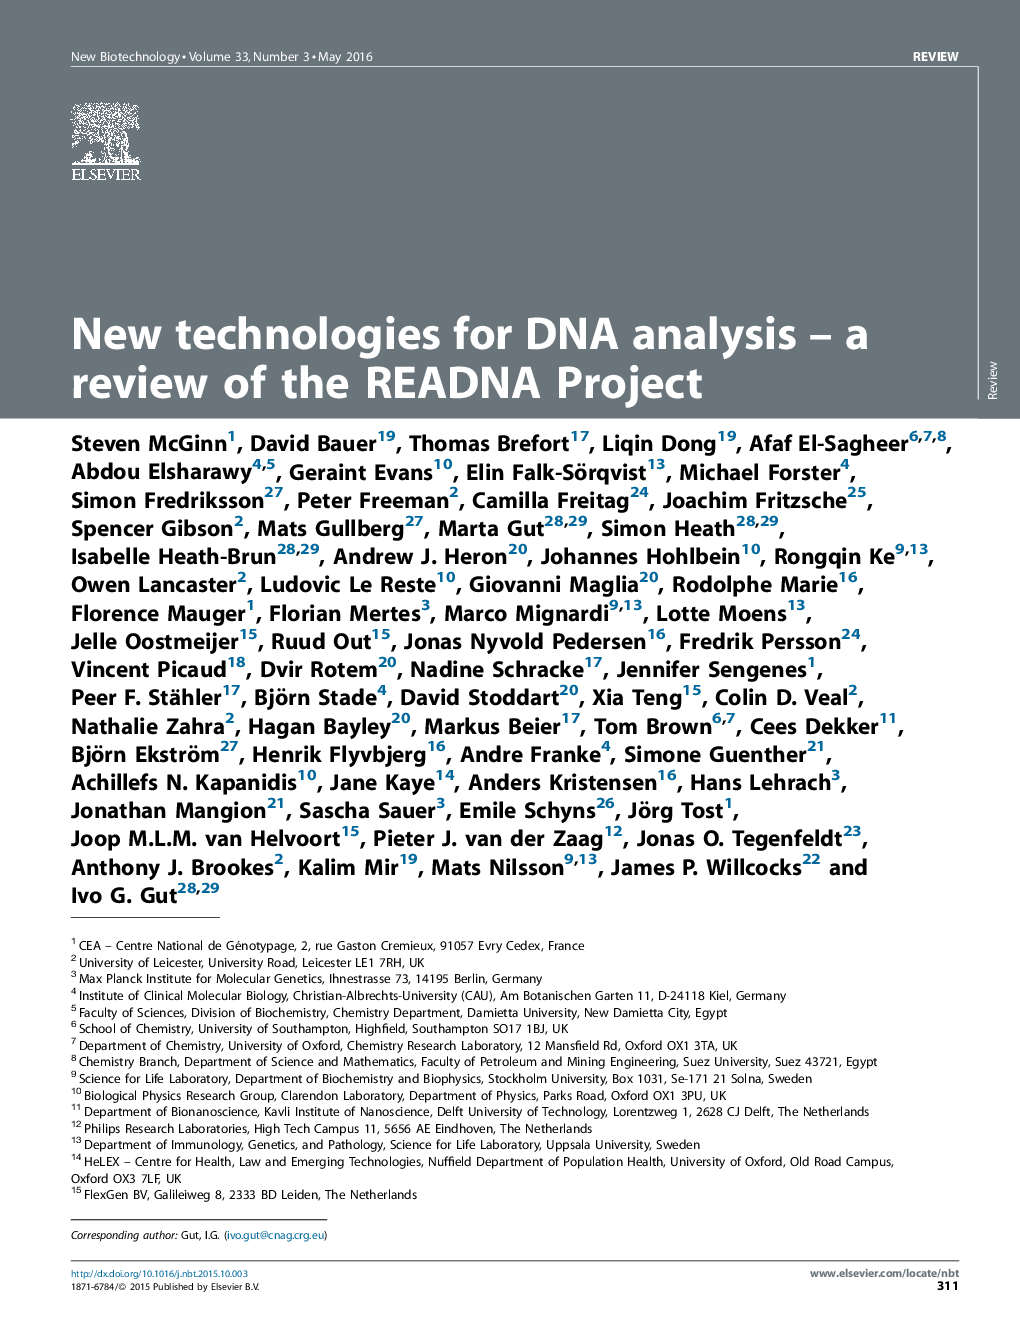 New technologies for DNA analysis – a review of the READNA Project